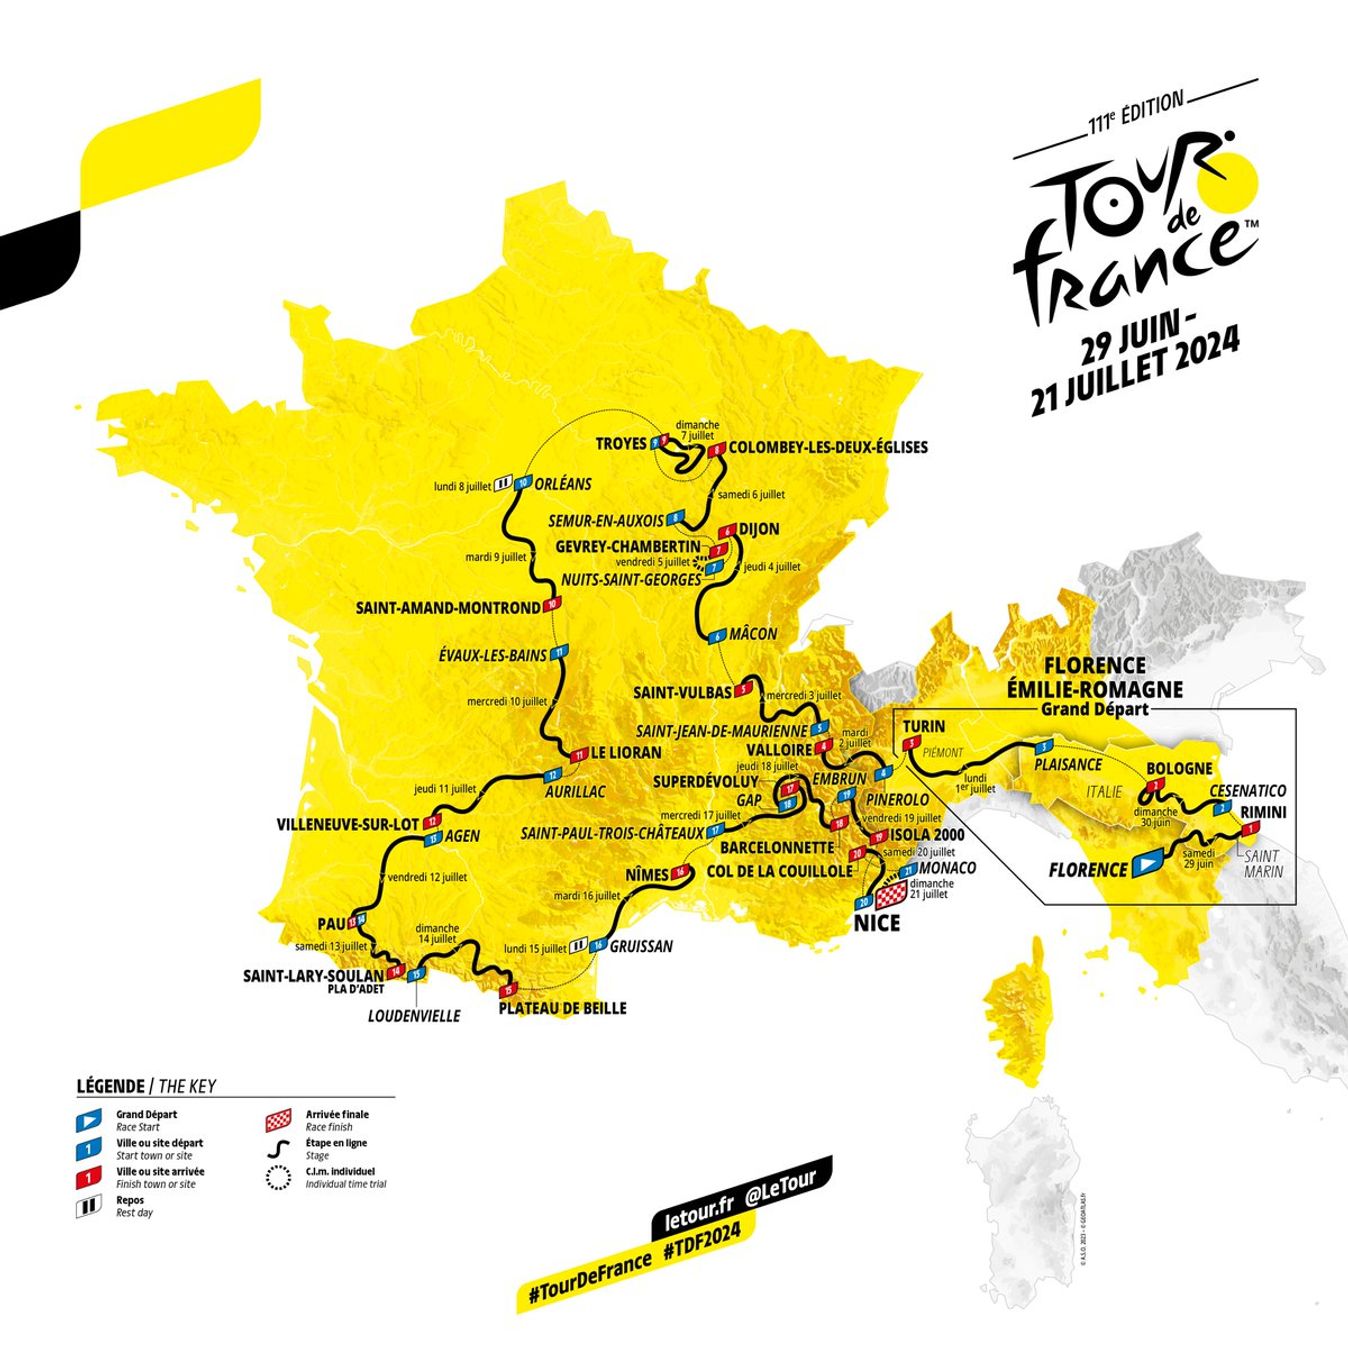 The 2024 Tour de France route will feature gravel for the first time